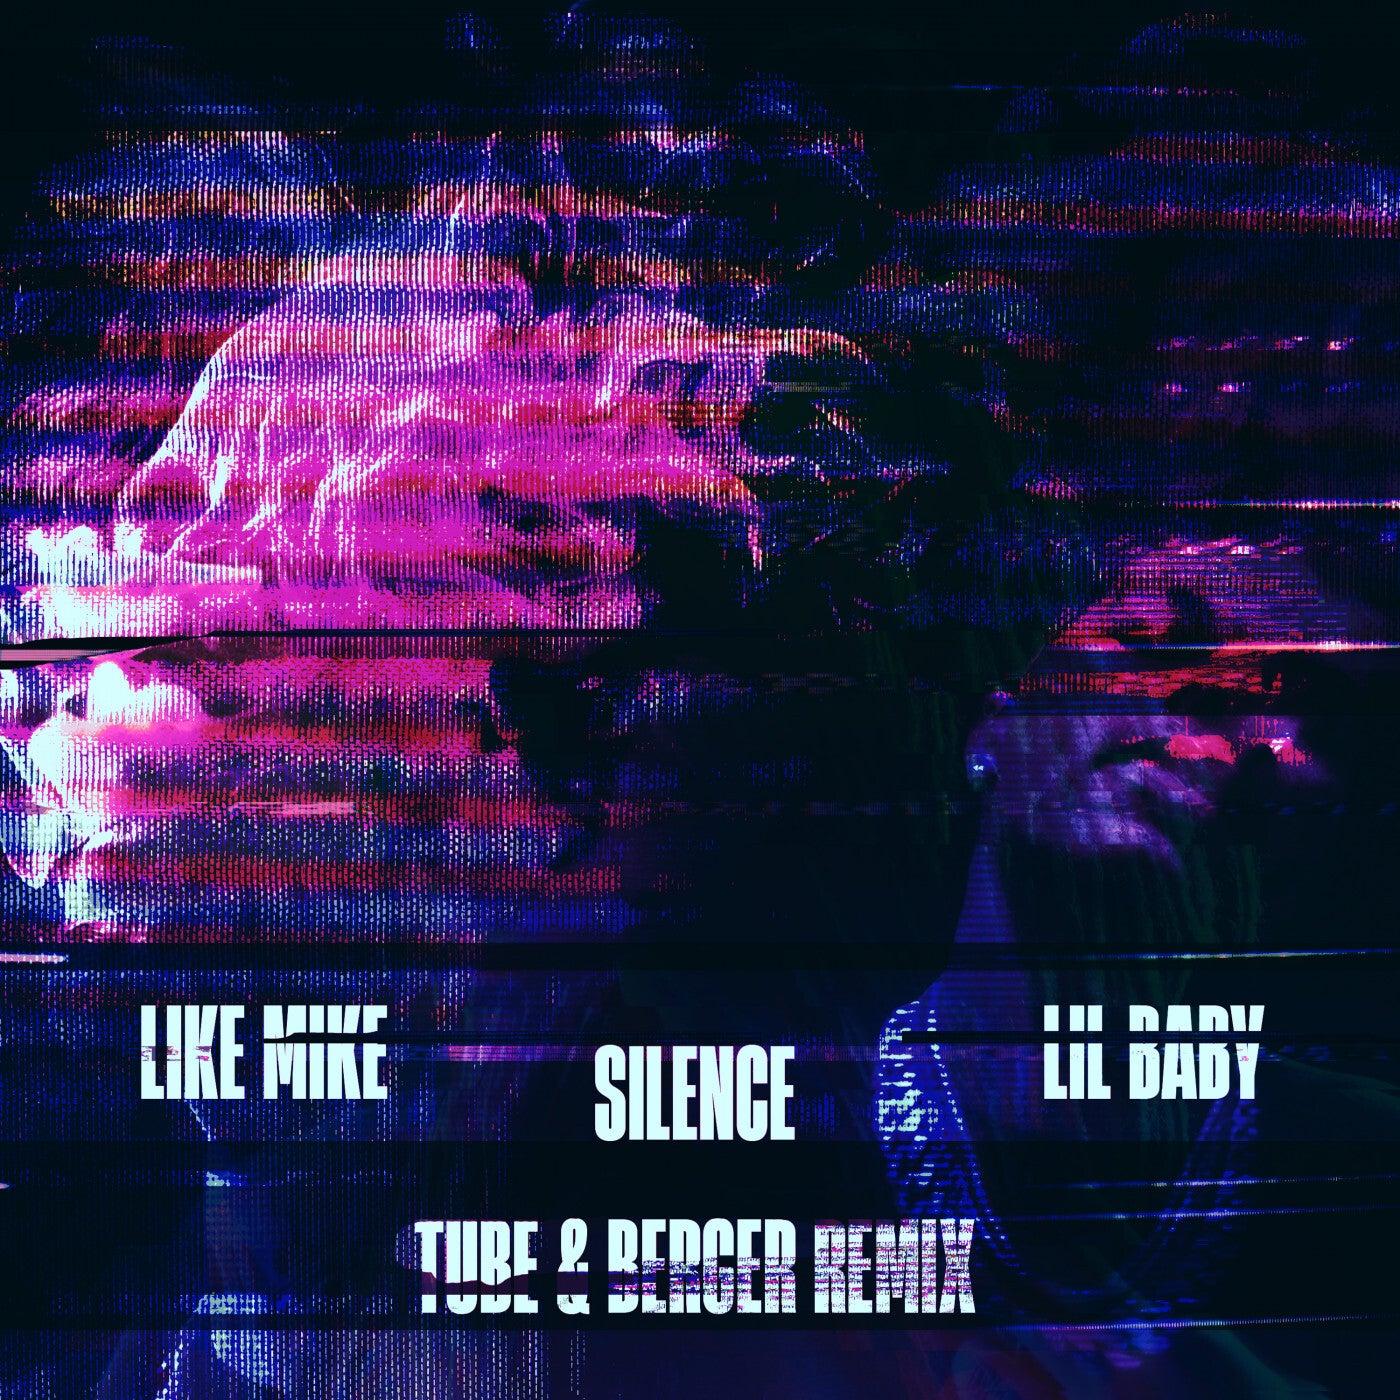 Like Mike - Silence feat. Lil Baby (Tube & Berger Remix)